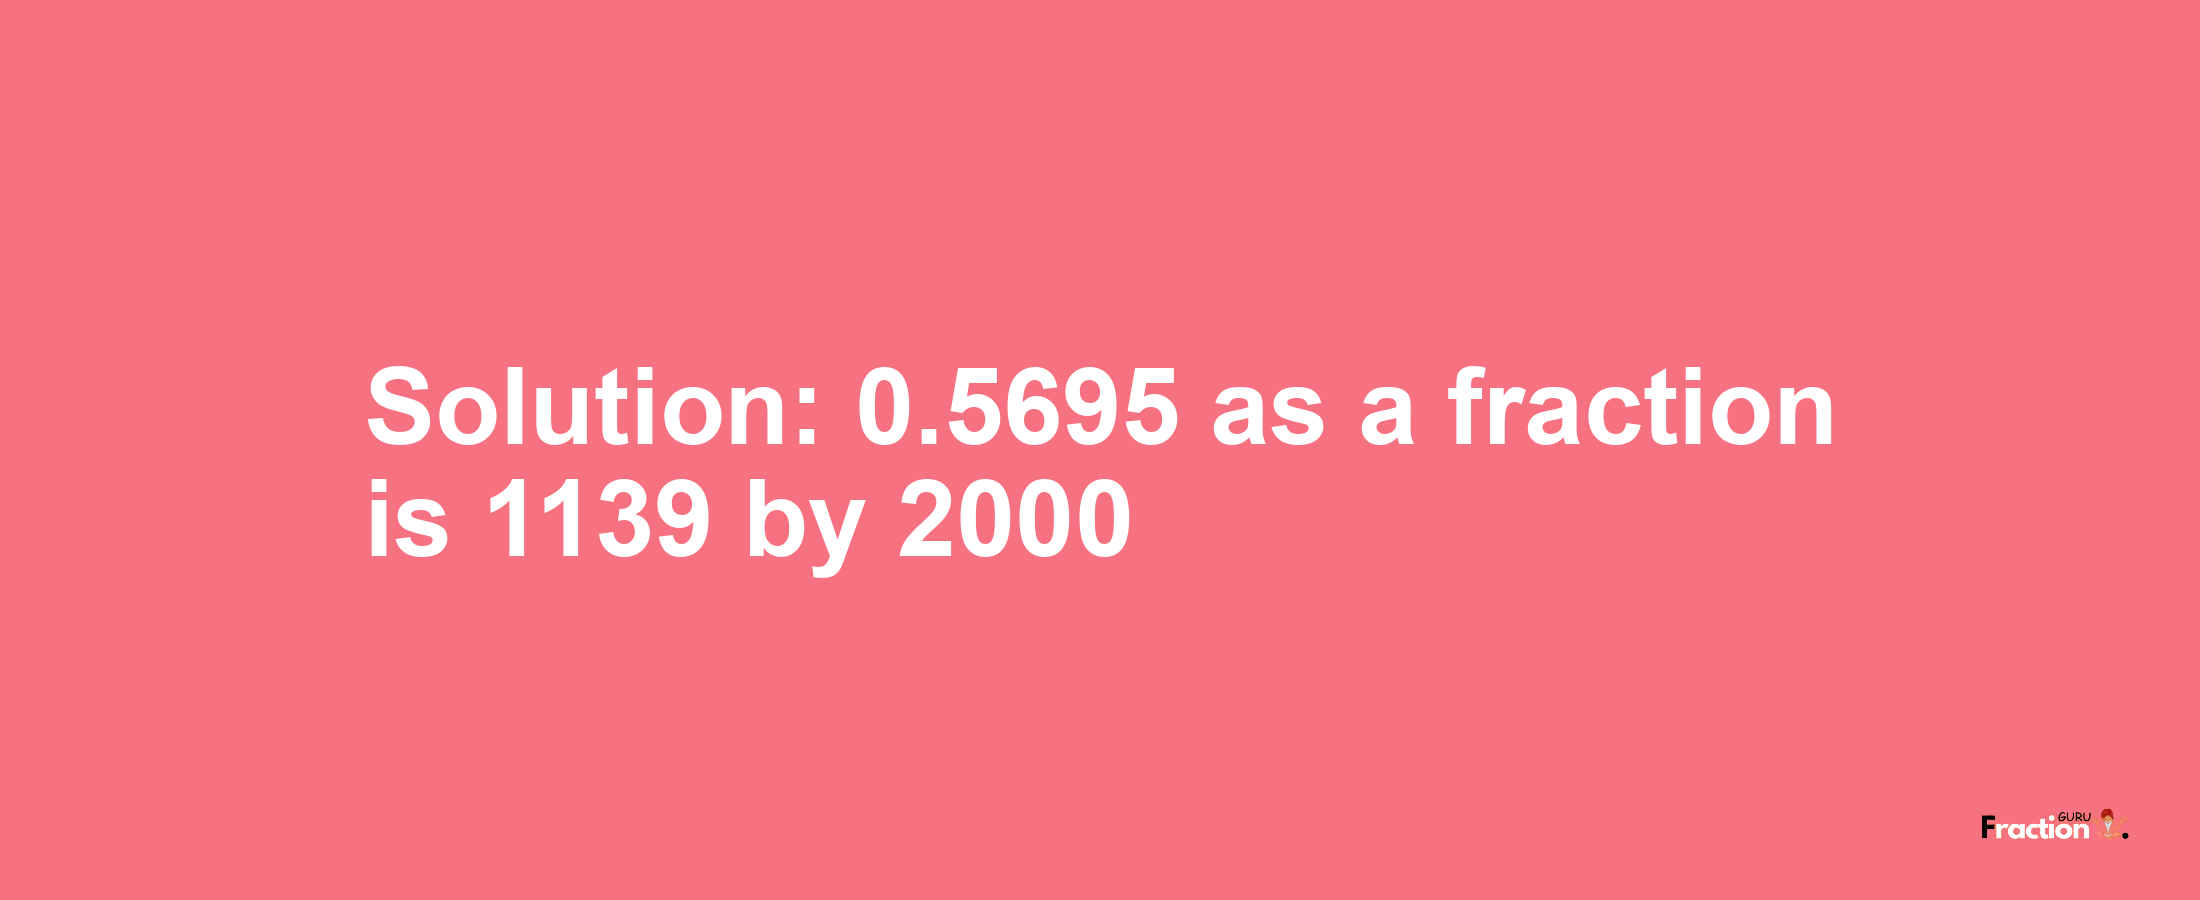 Solution:0.5695 as a fraction is 1139/2000